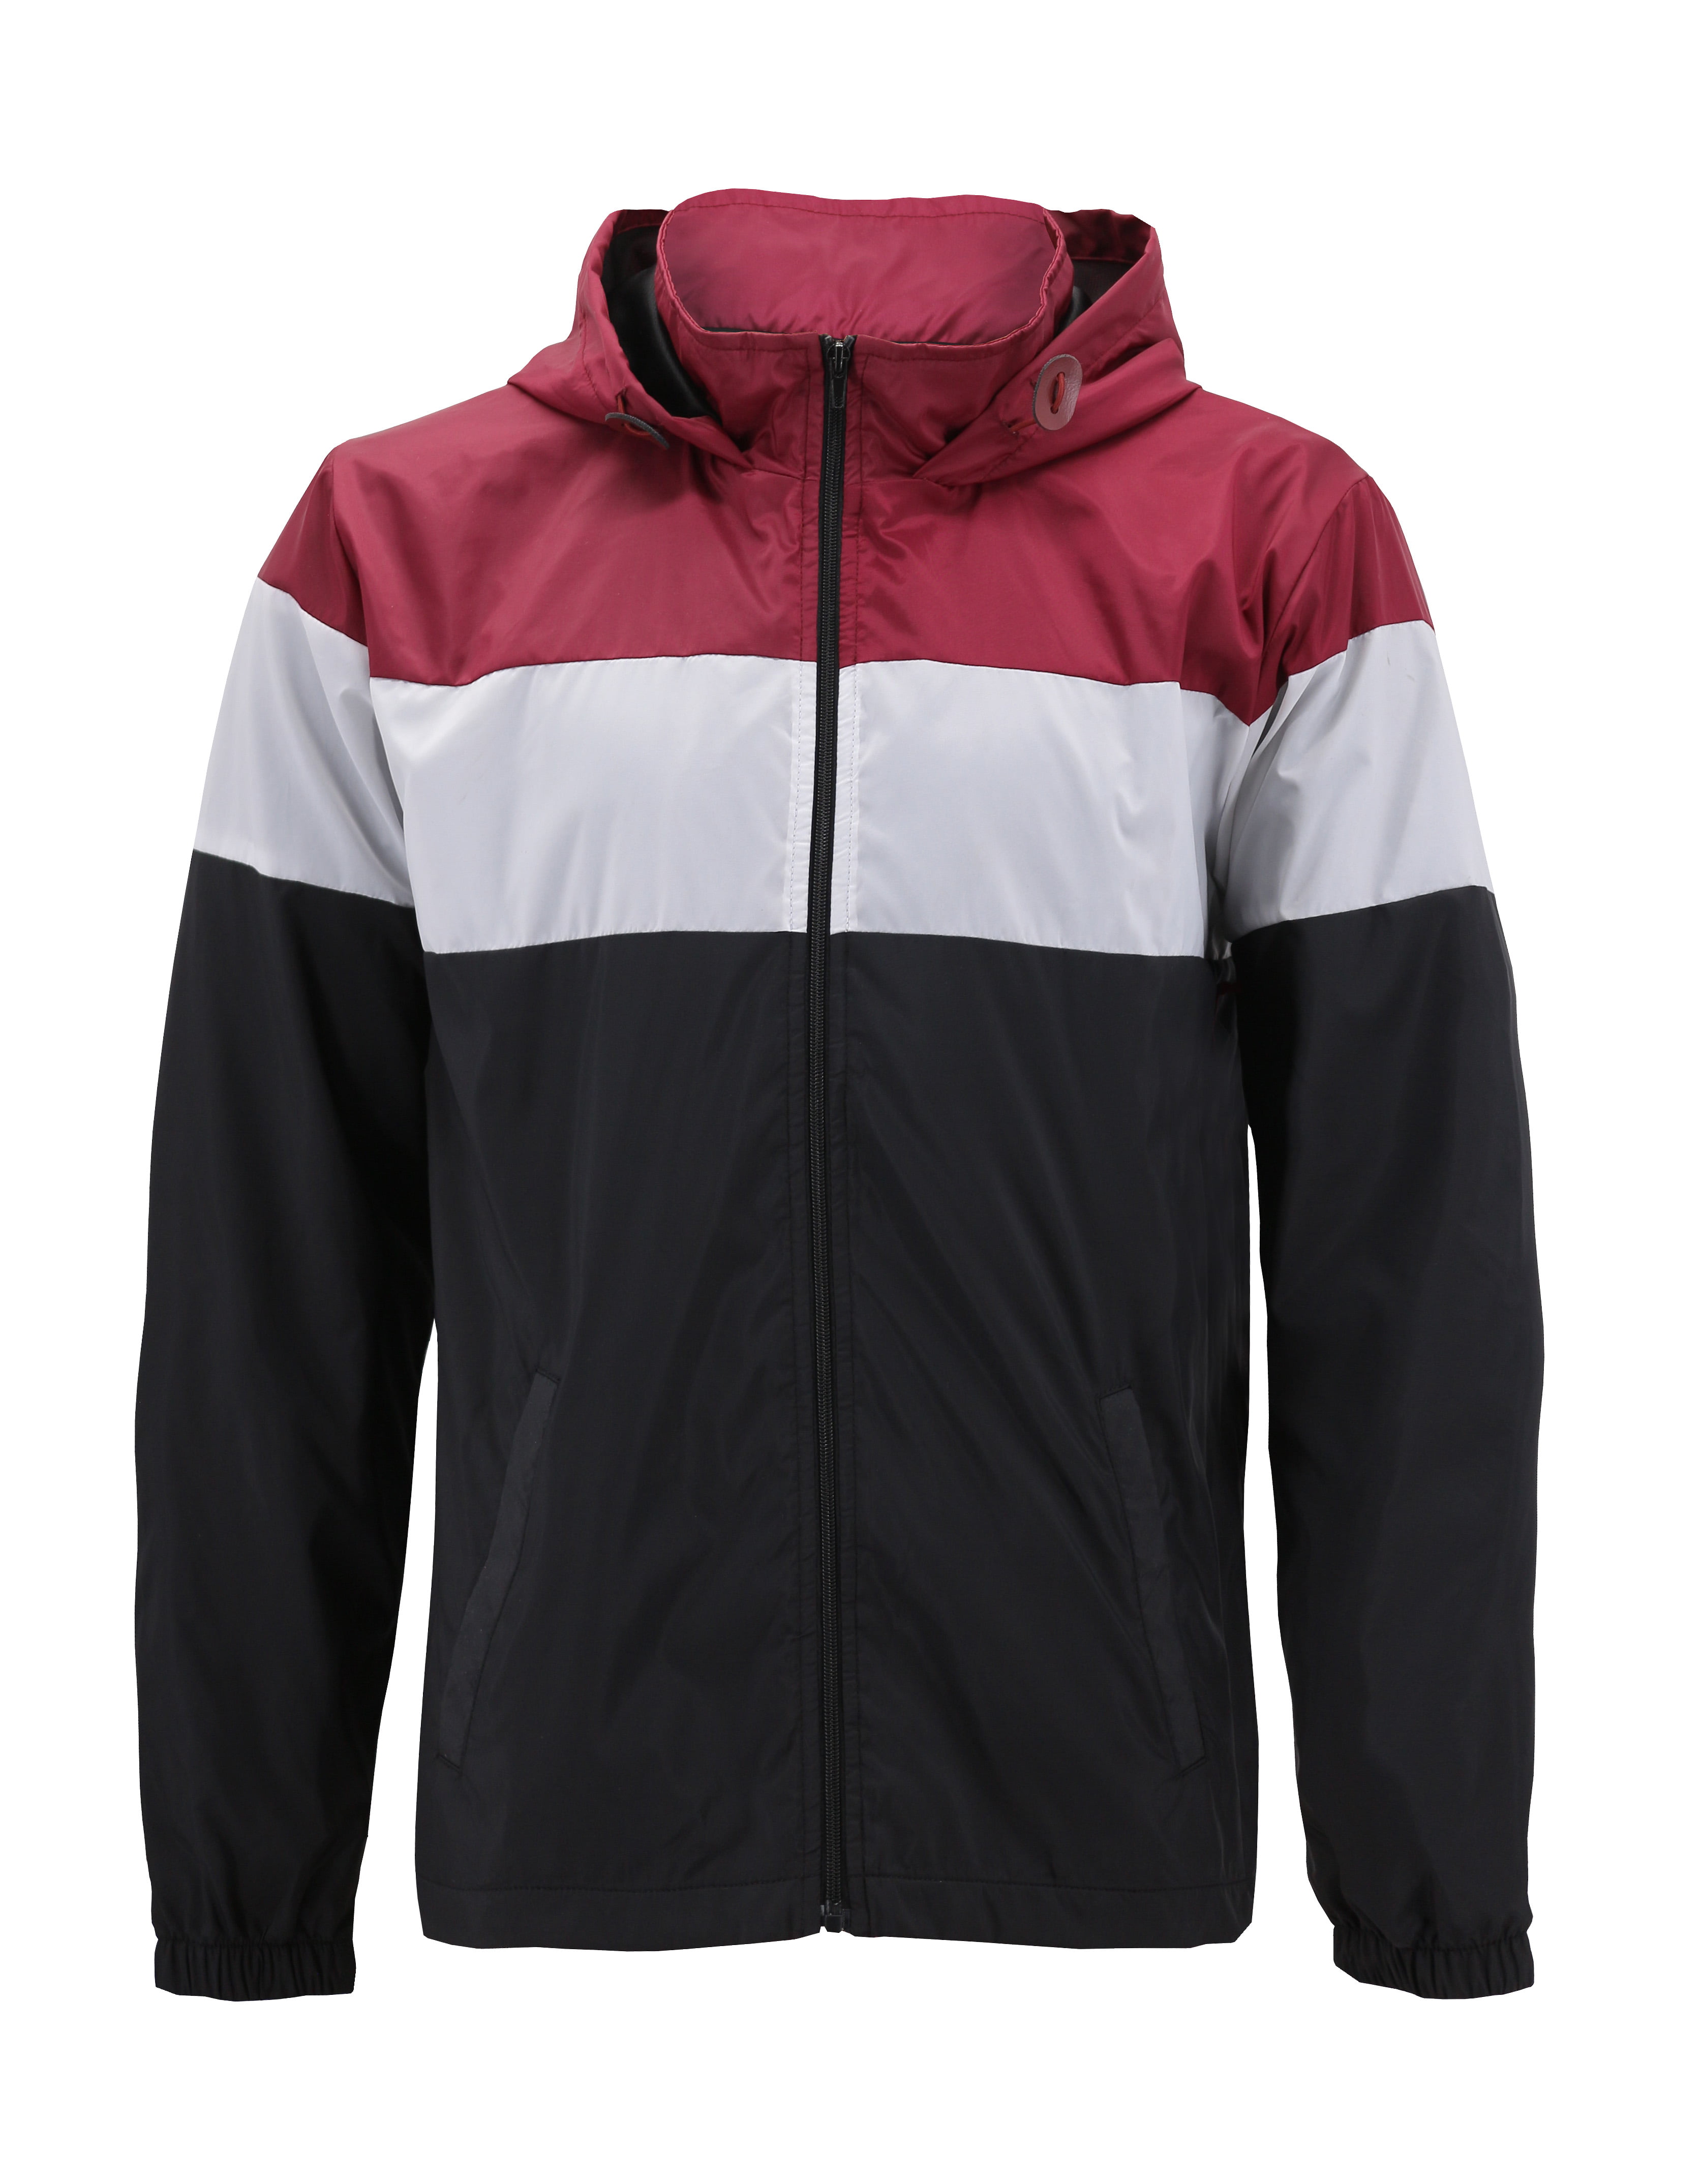 Red Label - Men’s Red Label Hooded Nylon Zip Up Lightweight Athletic ...